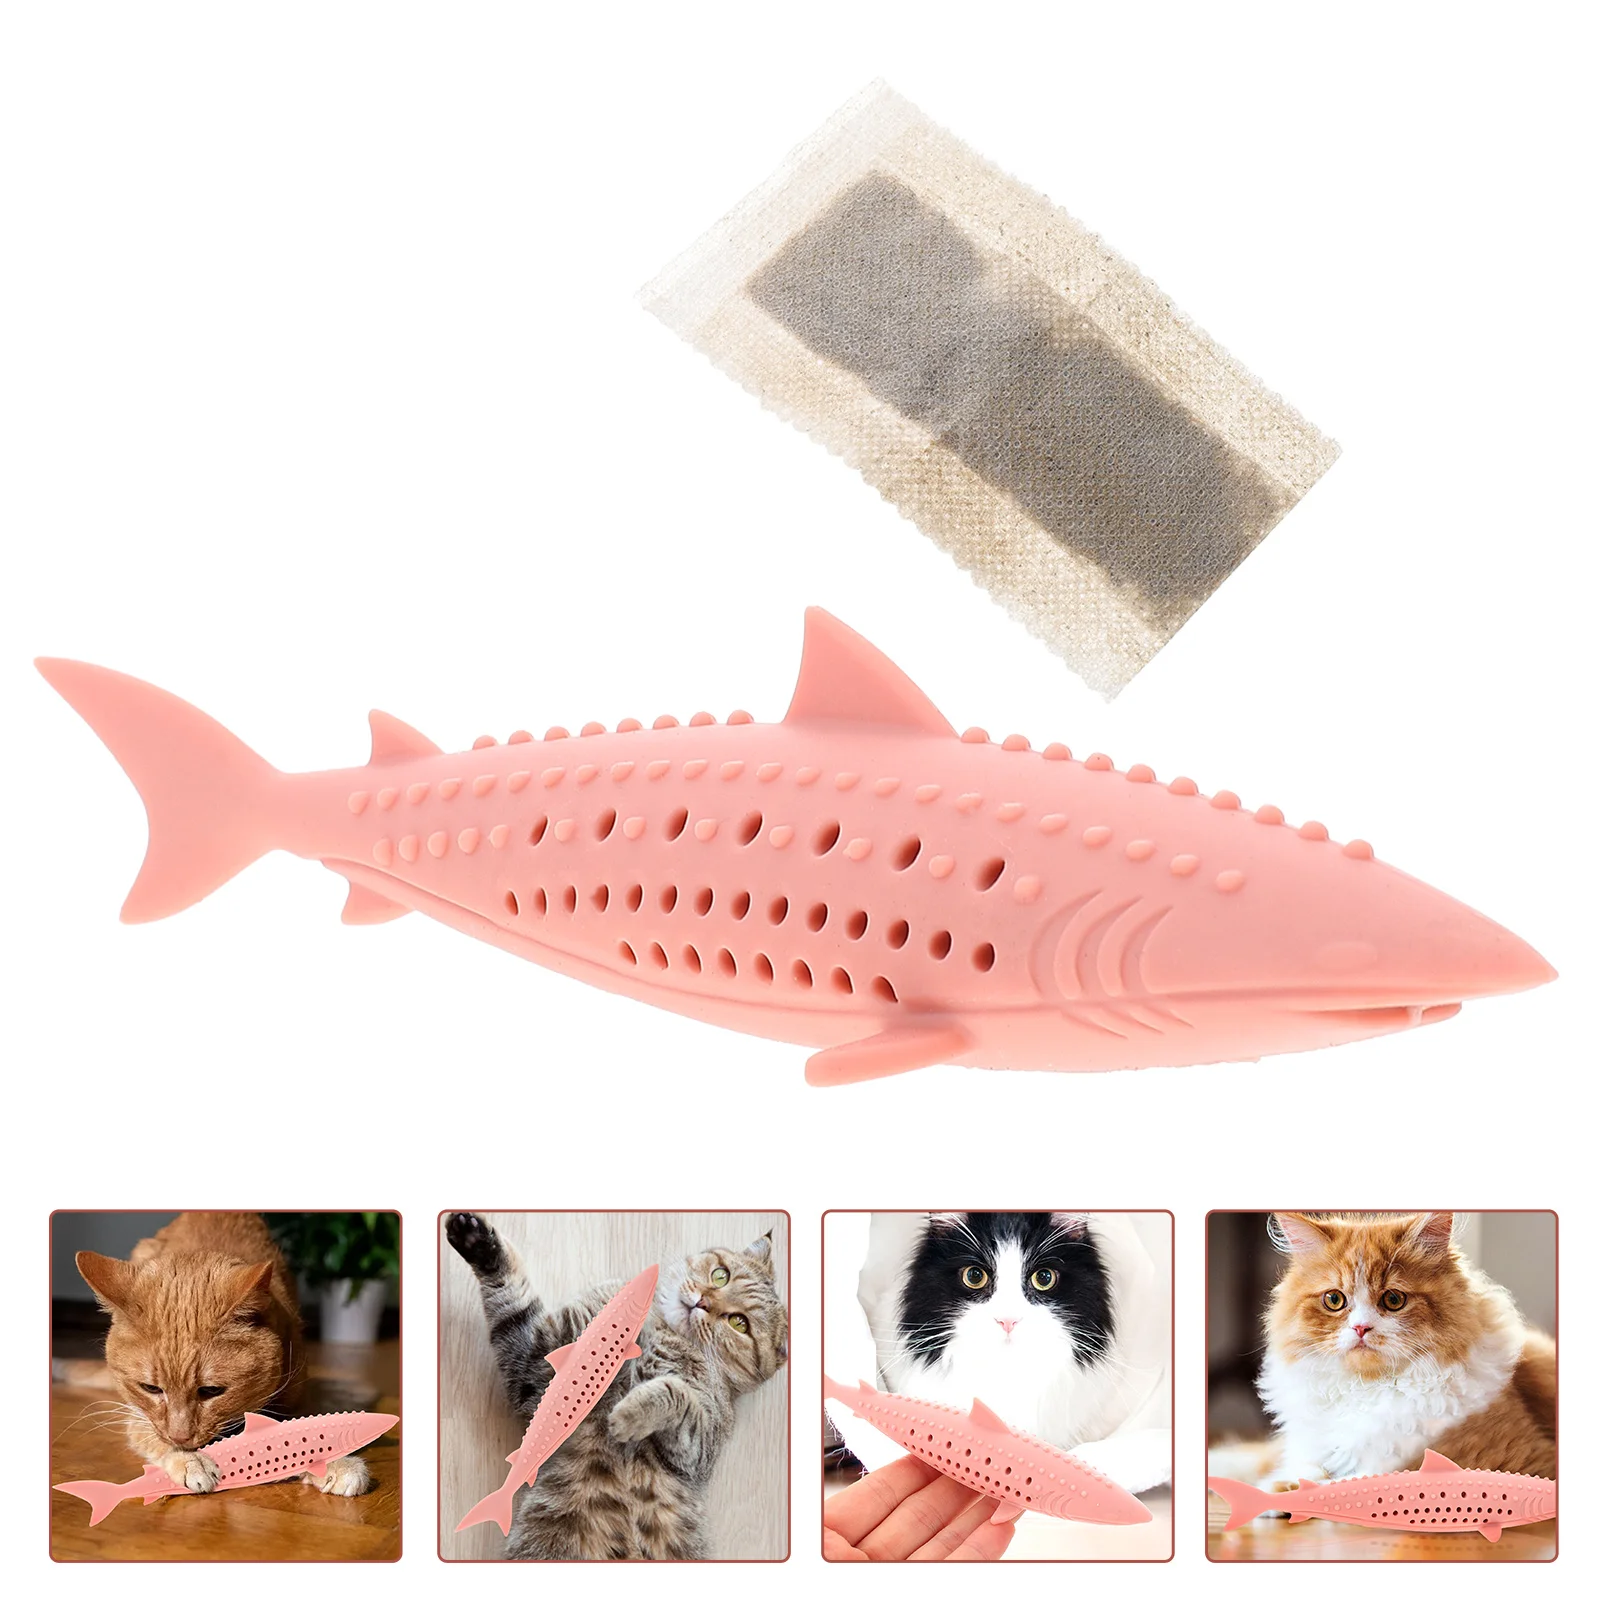 

Cat Toy Toys Chew Kitten Catnip Interactive Teething Cats Stuff Silicone Teaser Plaything Pet Biting Teether Chewing Scratch